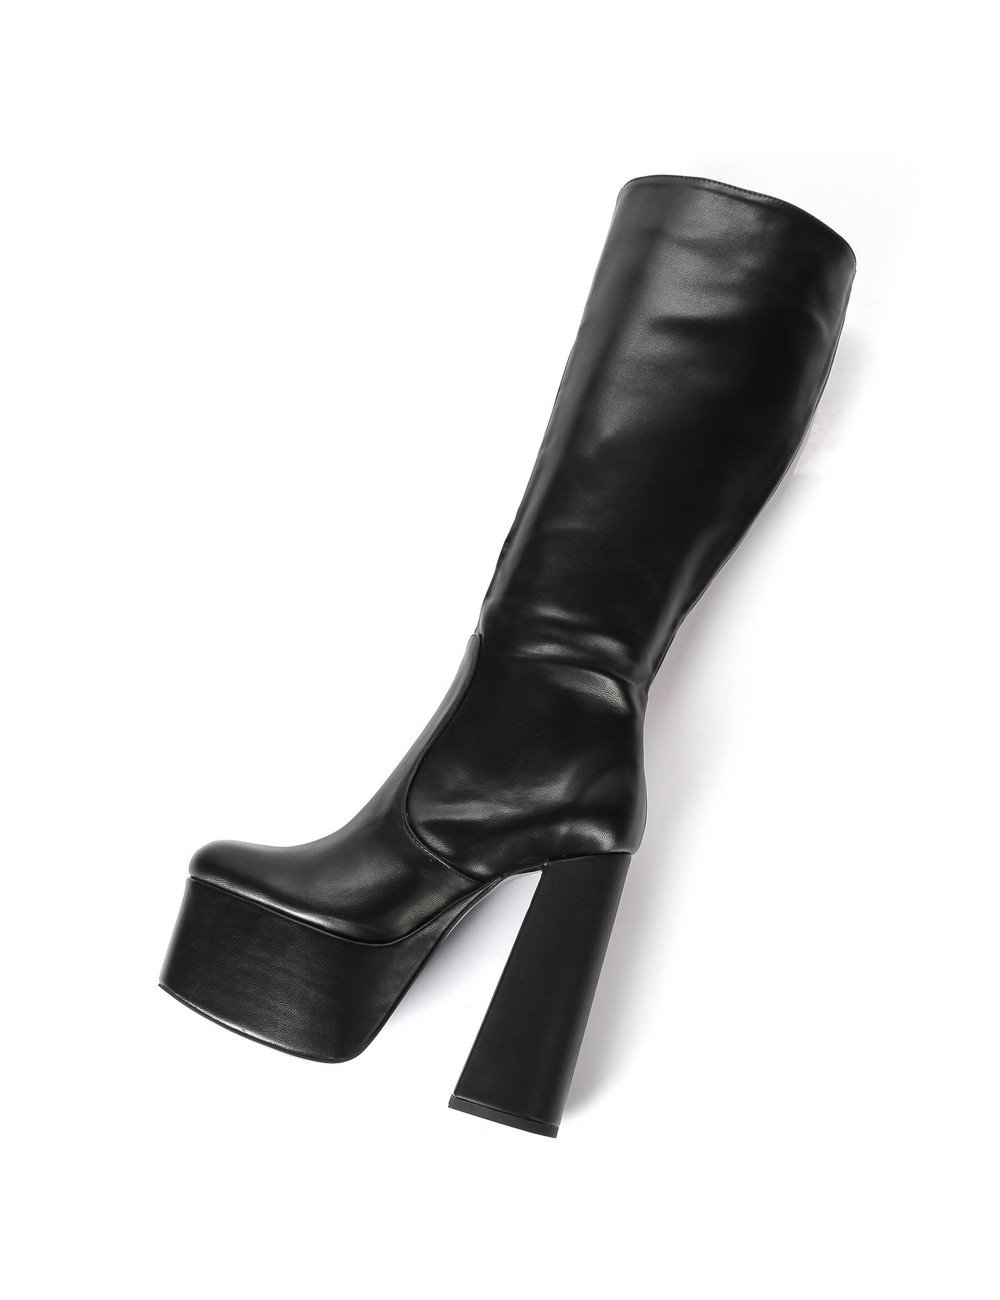 Ellie Tailor by Giaro Black chunky heel "Emmy" knee boots by Ellie